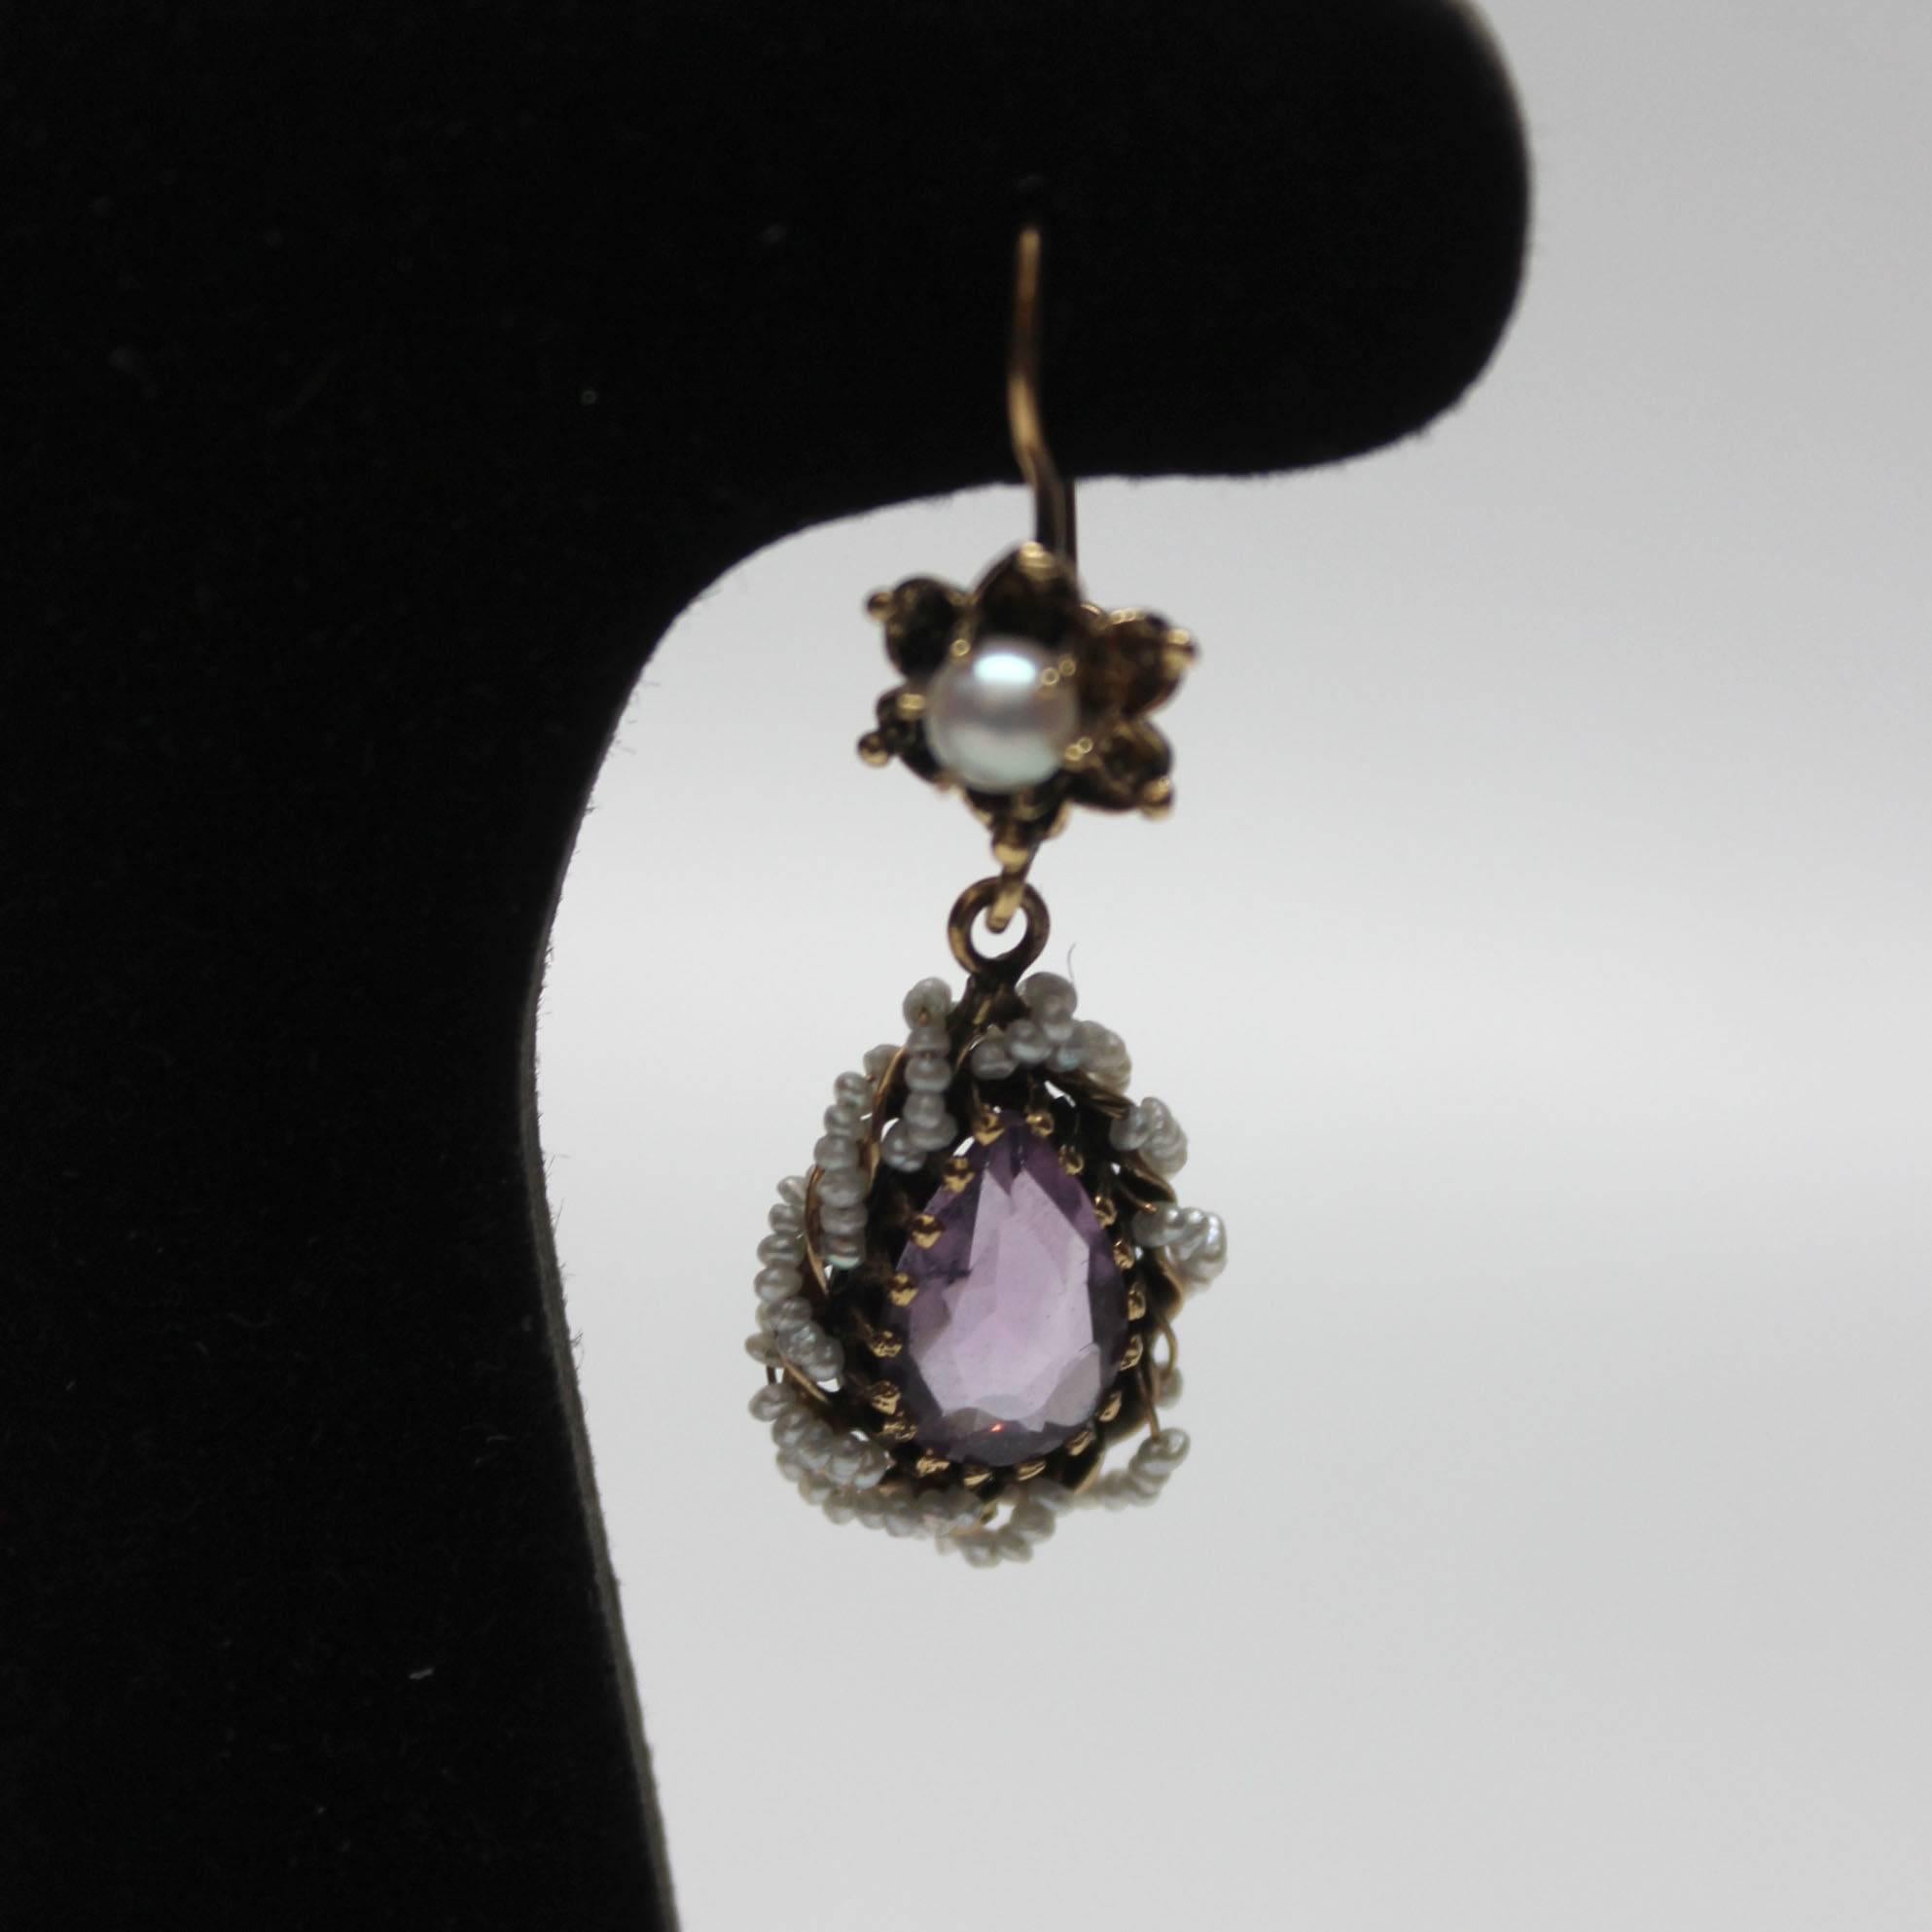 These Victorian era earrings are exquisite. A teardrop with an amethyst center is set in gold and encircled by delicate seed pearls. The post is star shaped and has a pearl at its center. The earrings are both marked with a 14k stamp. 